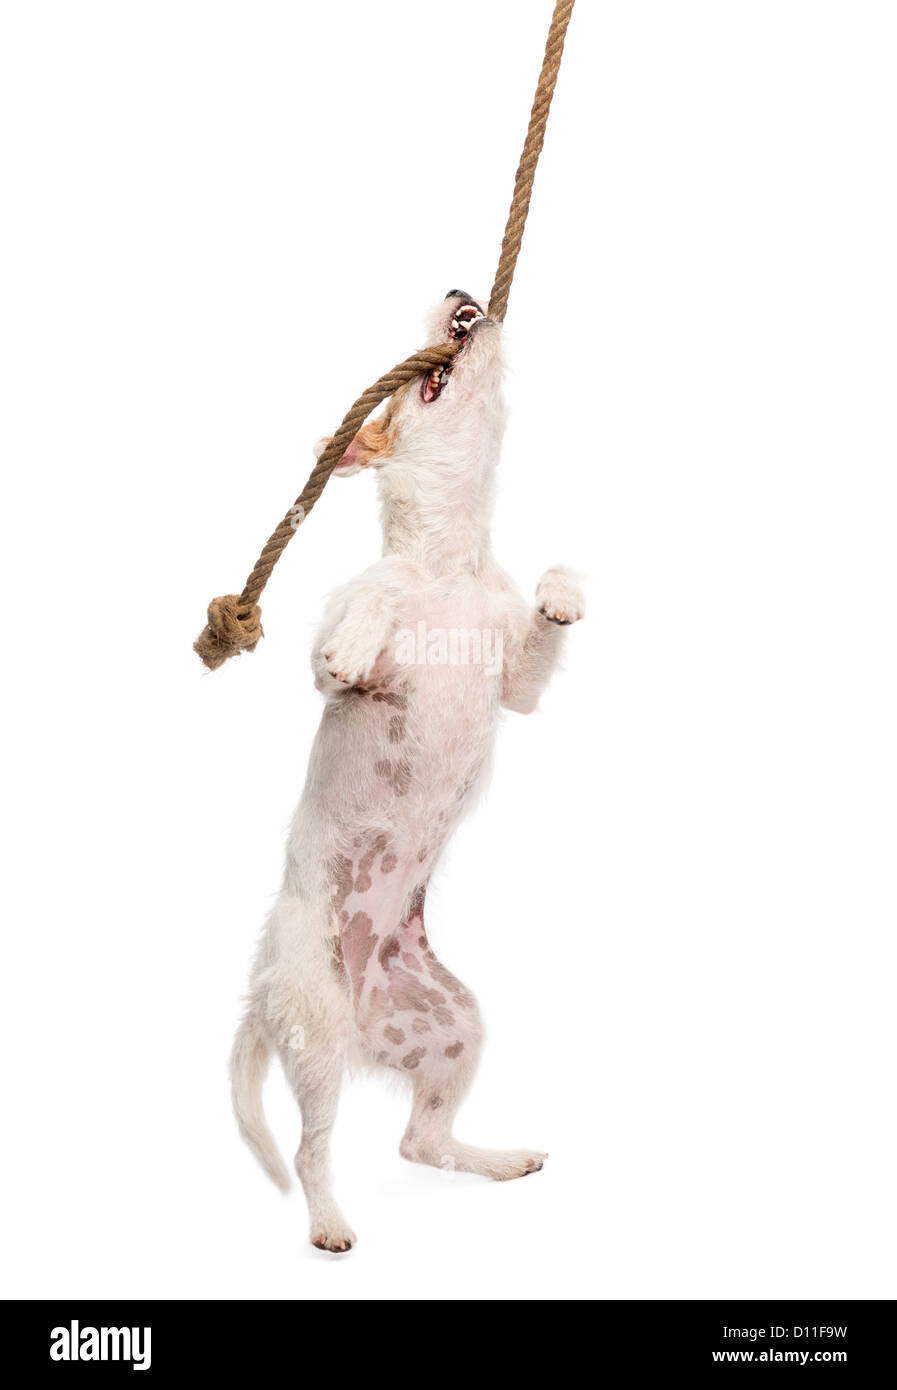 Parson Russell Terrier hanging on a rope against white background Stock Photo